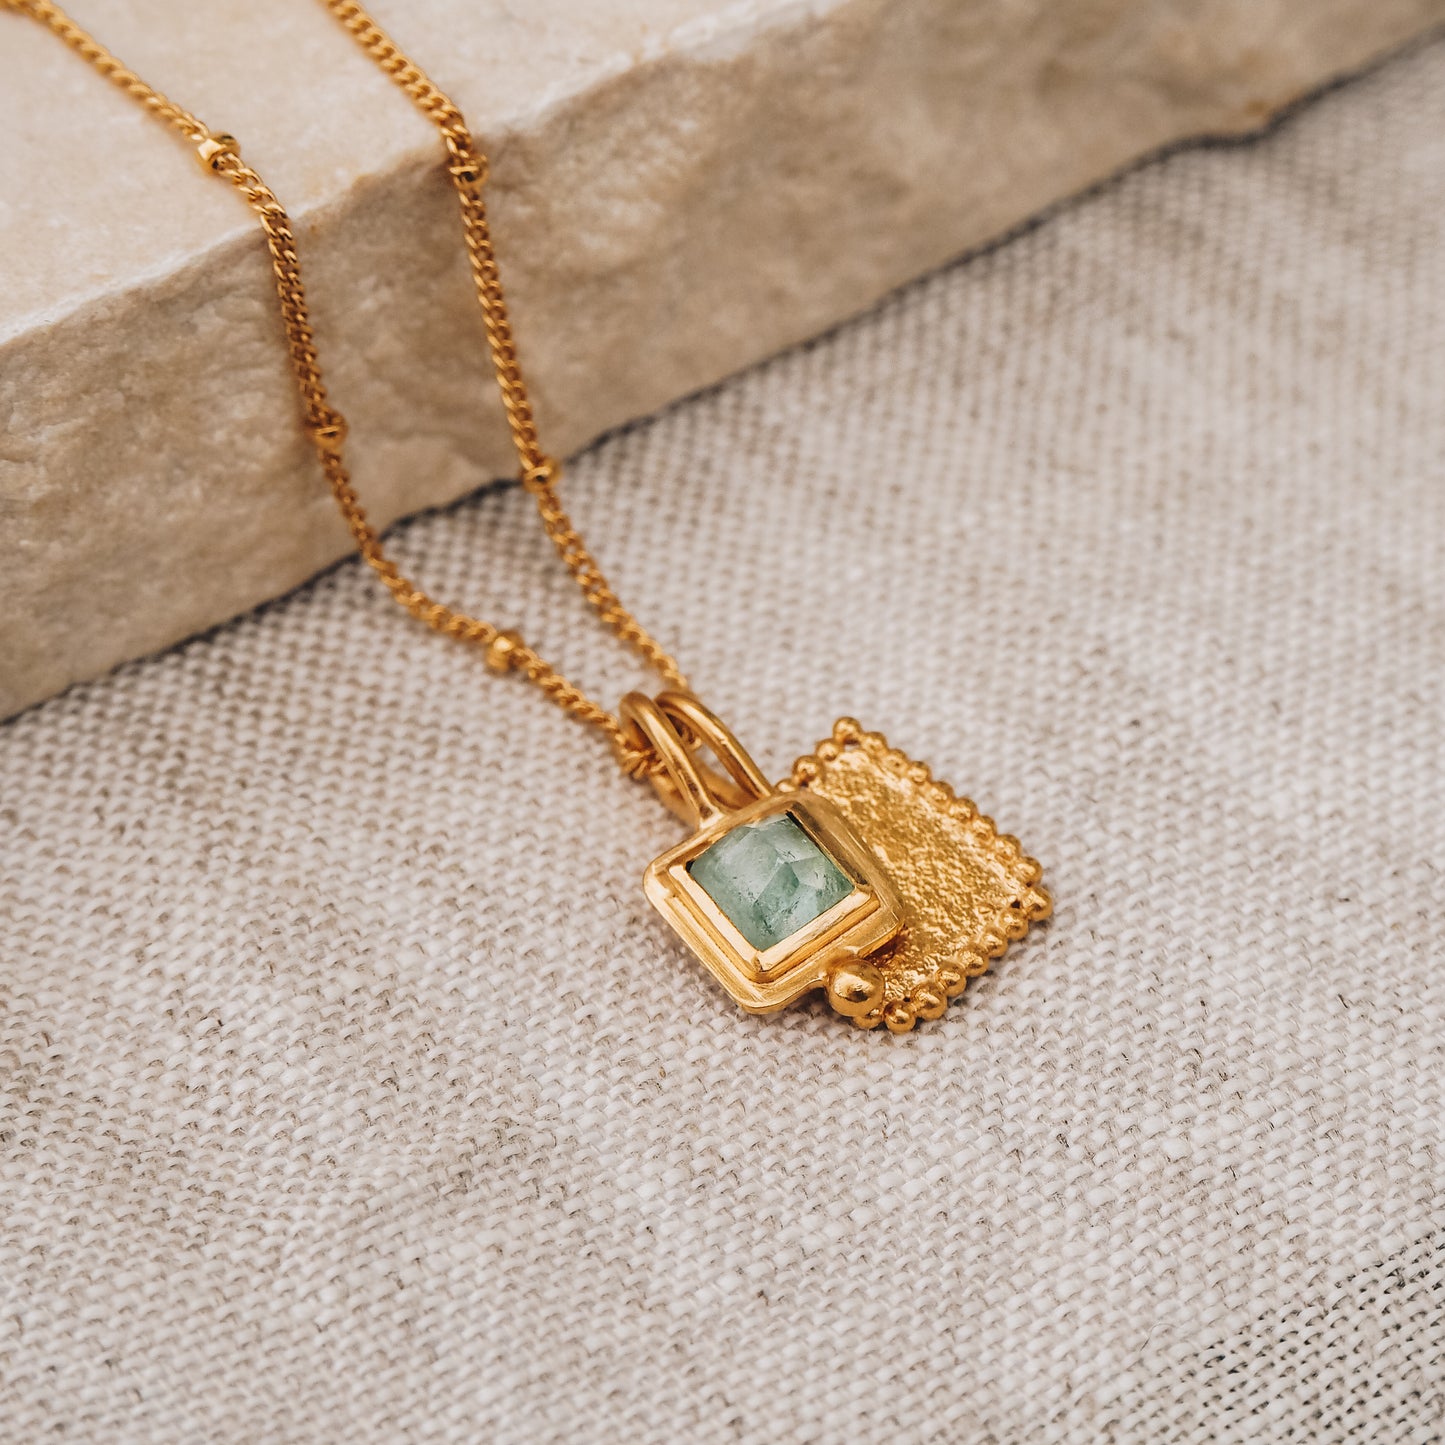 Artisan-crafted square gold pendant showcasing a breathtaking blue rose cut tourmaline gemstone and intricate granulation, suspended from a delicate satellite chain.